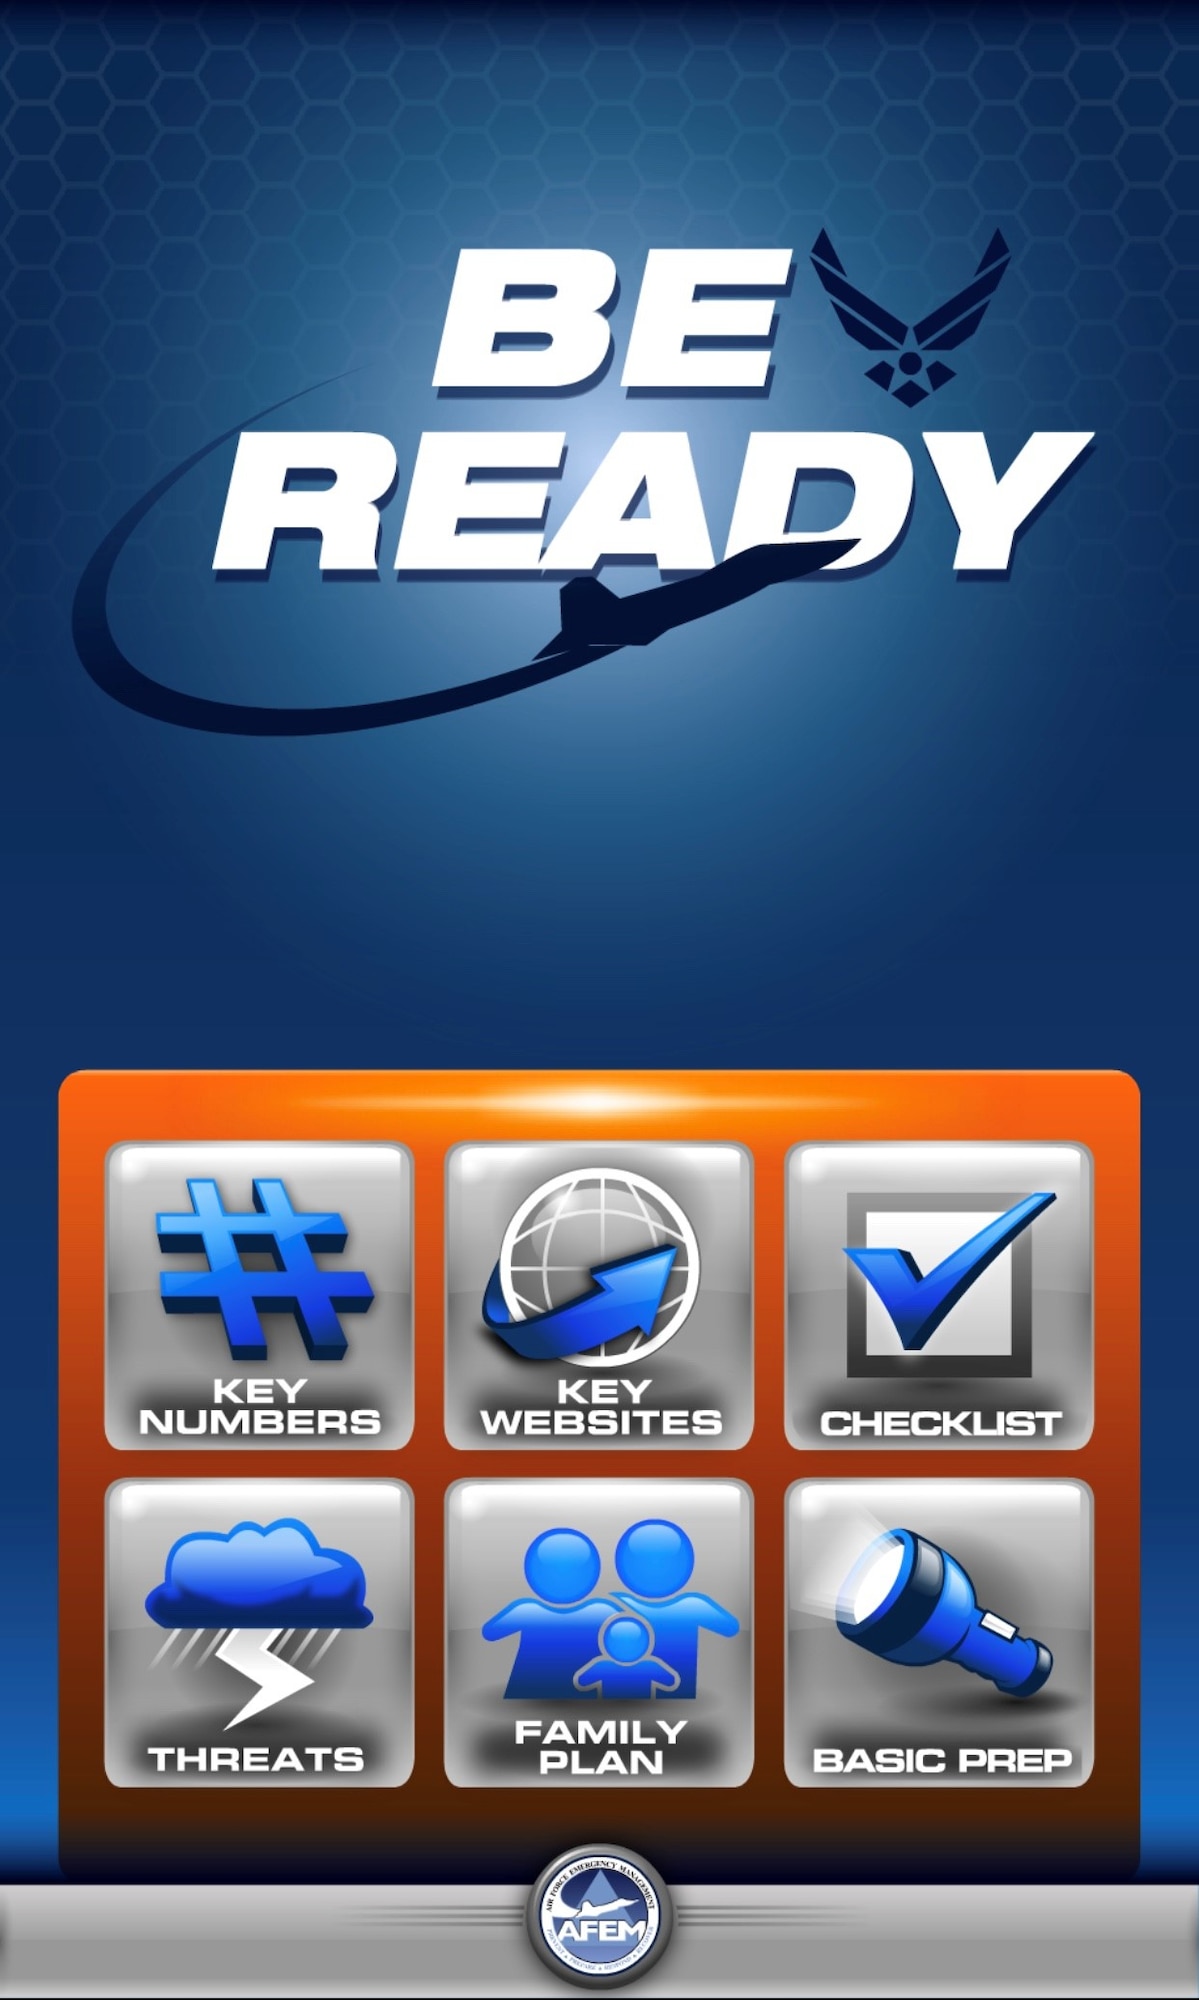 The “Air Force Be Ready” app features a main menu that includes: emergency phone numbers, websites, a storm preparation checklist, potential storm threats, a customizable family plan and basic preparation suggestions.